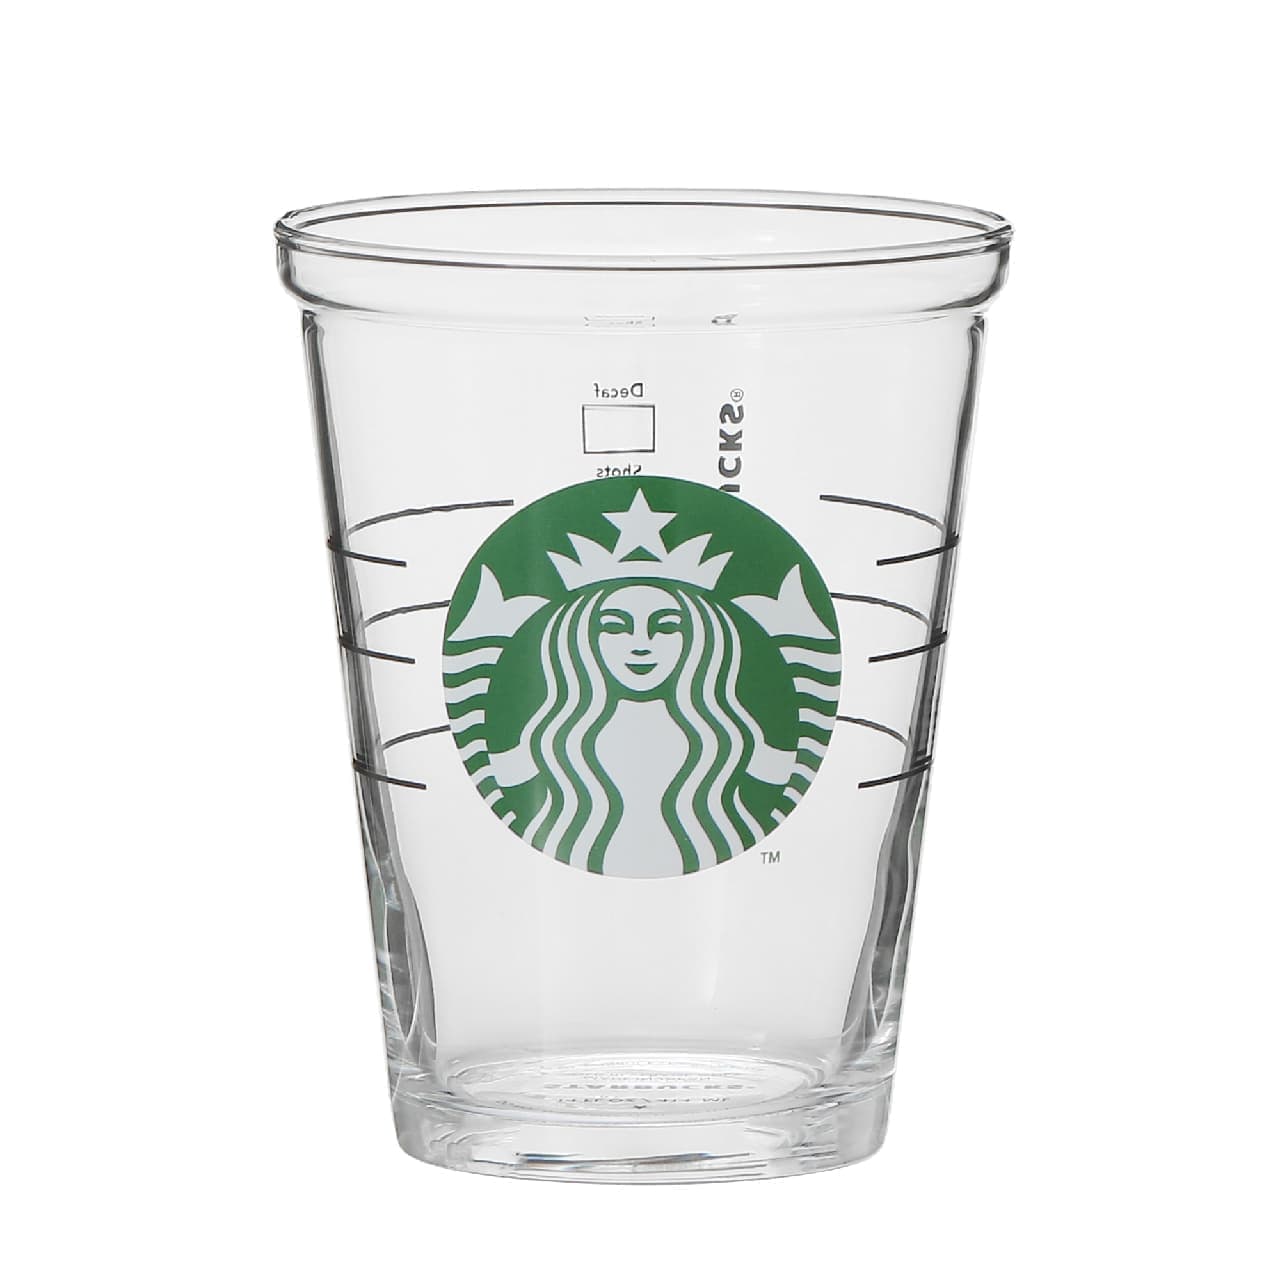 Starbucks Cold Cup Glasses, Stainless Steel Mini Bottles, Reusable Straws &  Silicone Cases, etc. -- Simple Spring Season Goods []